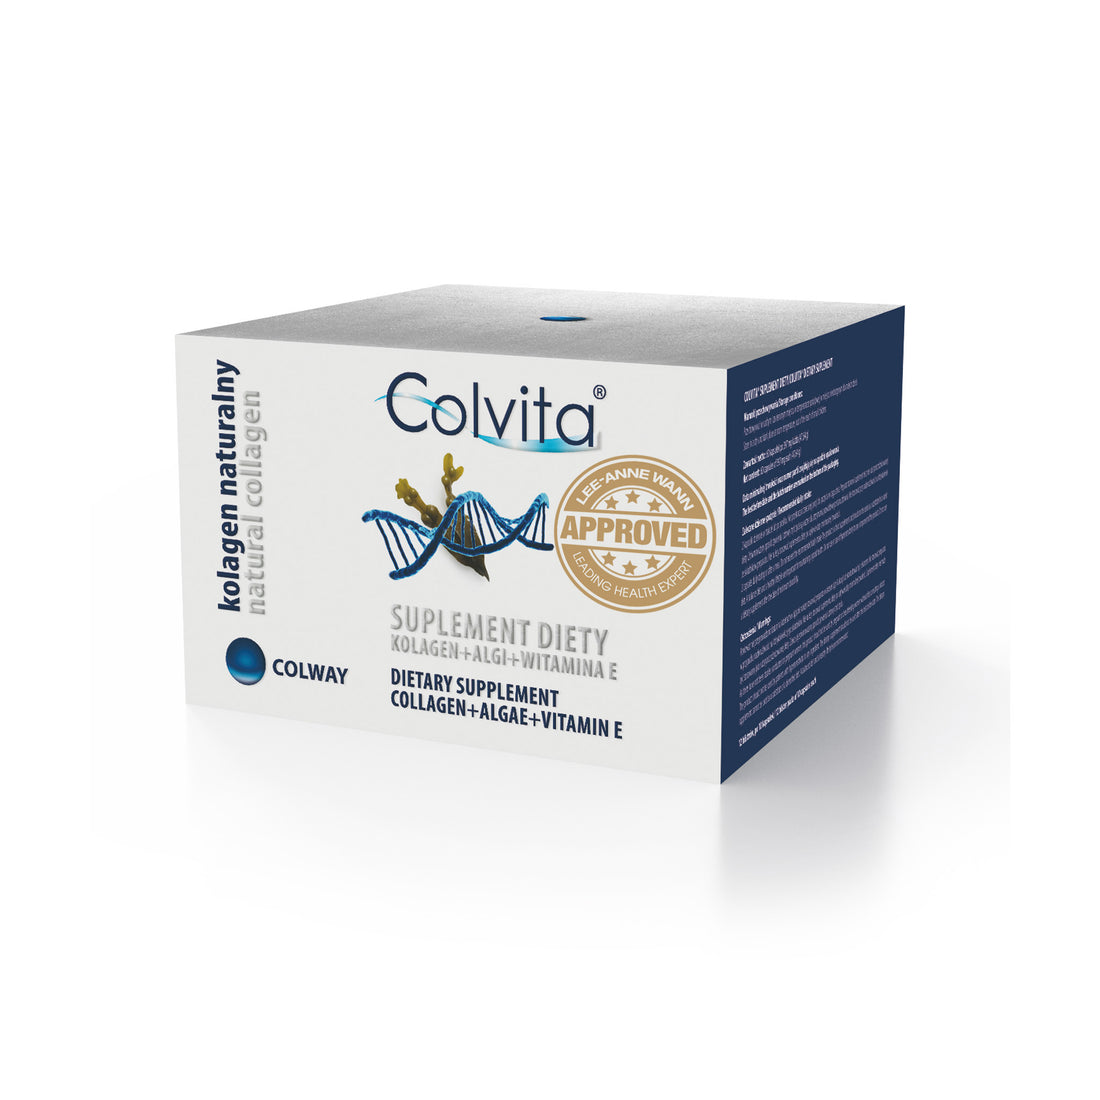 Colvita Active Collagen – the only dietary supplement of its kind in the world